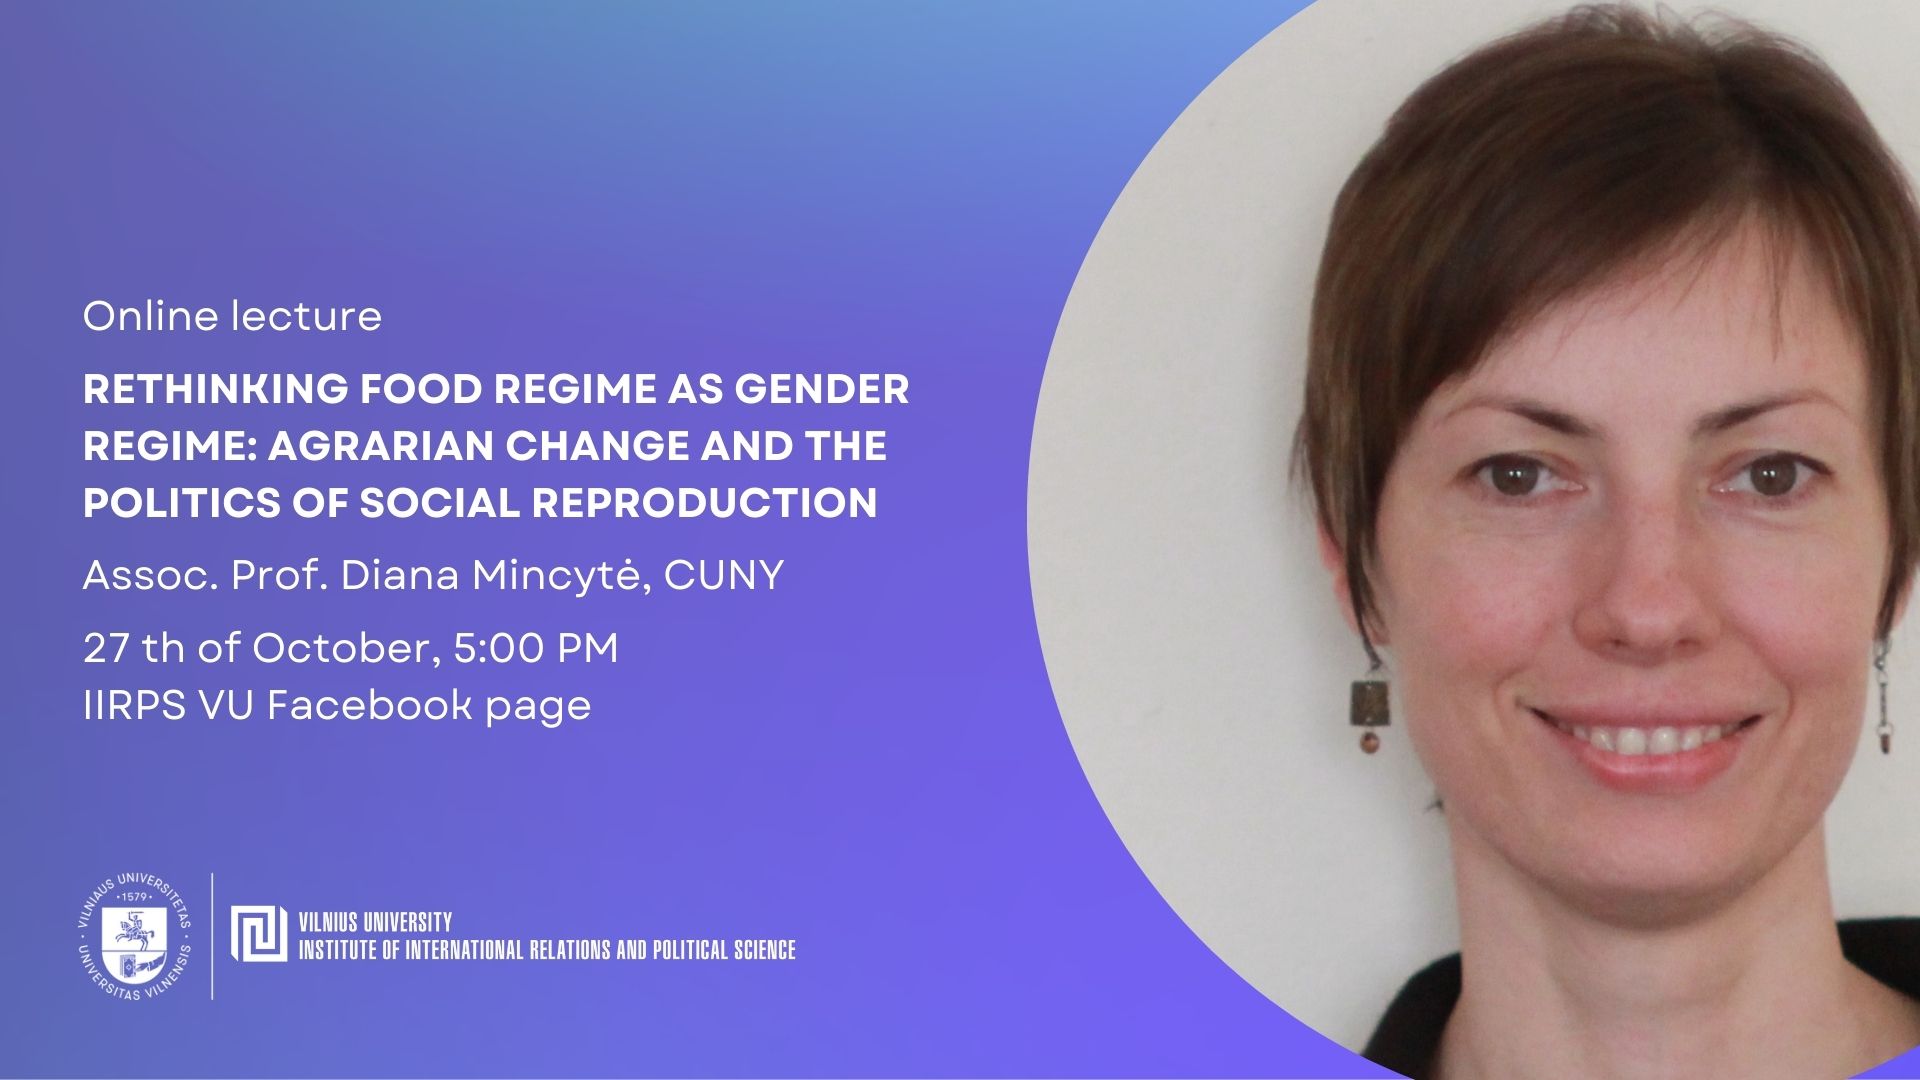 Nuotolinė paskaita „Rethinking Food Regime as Gender Regime: Agrarian Change and the Politics of Social Reproduction”